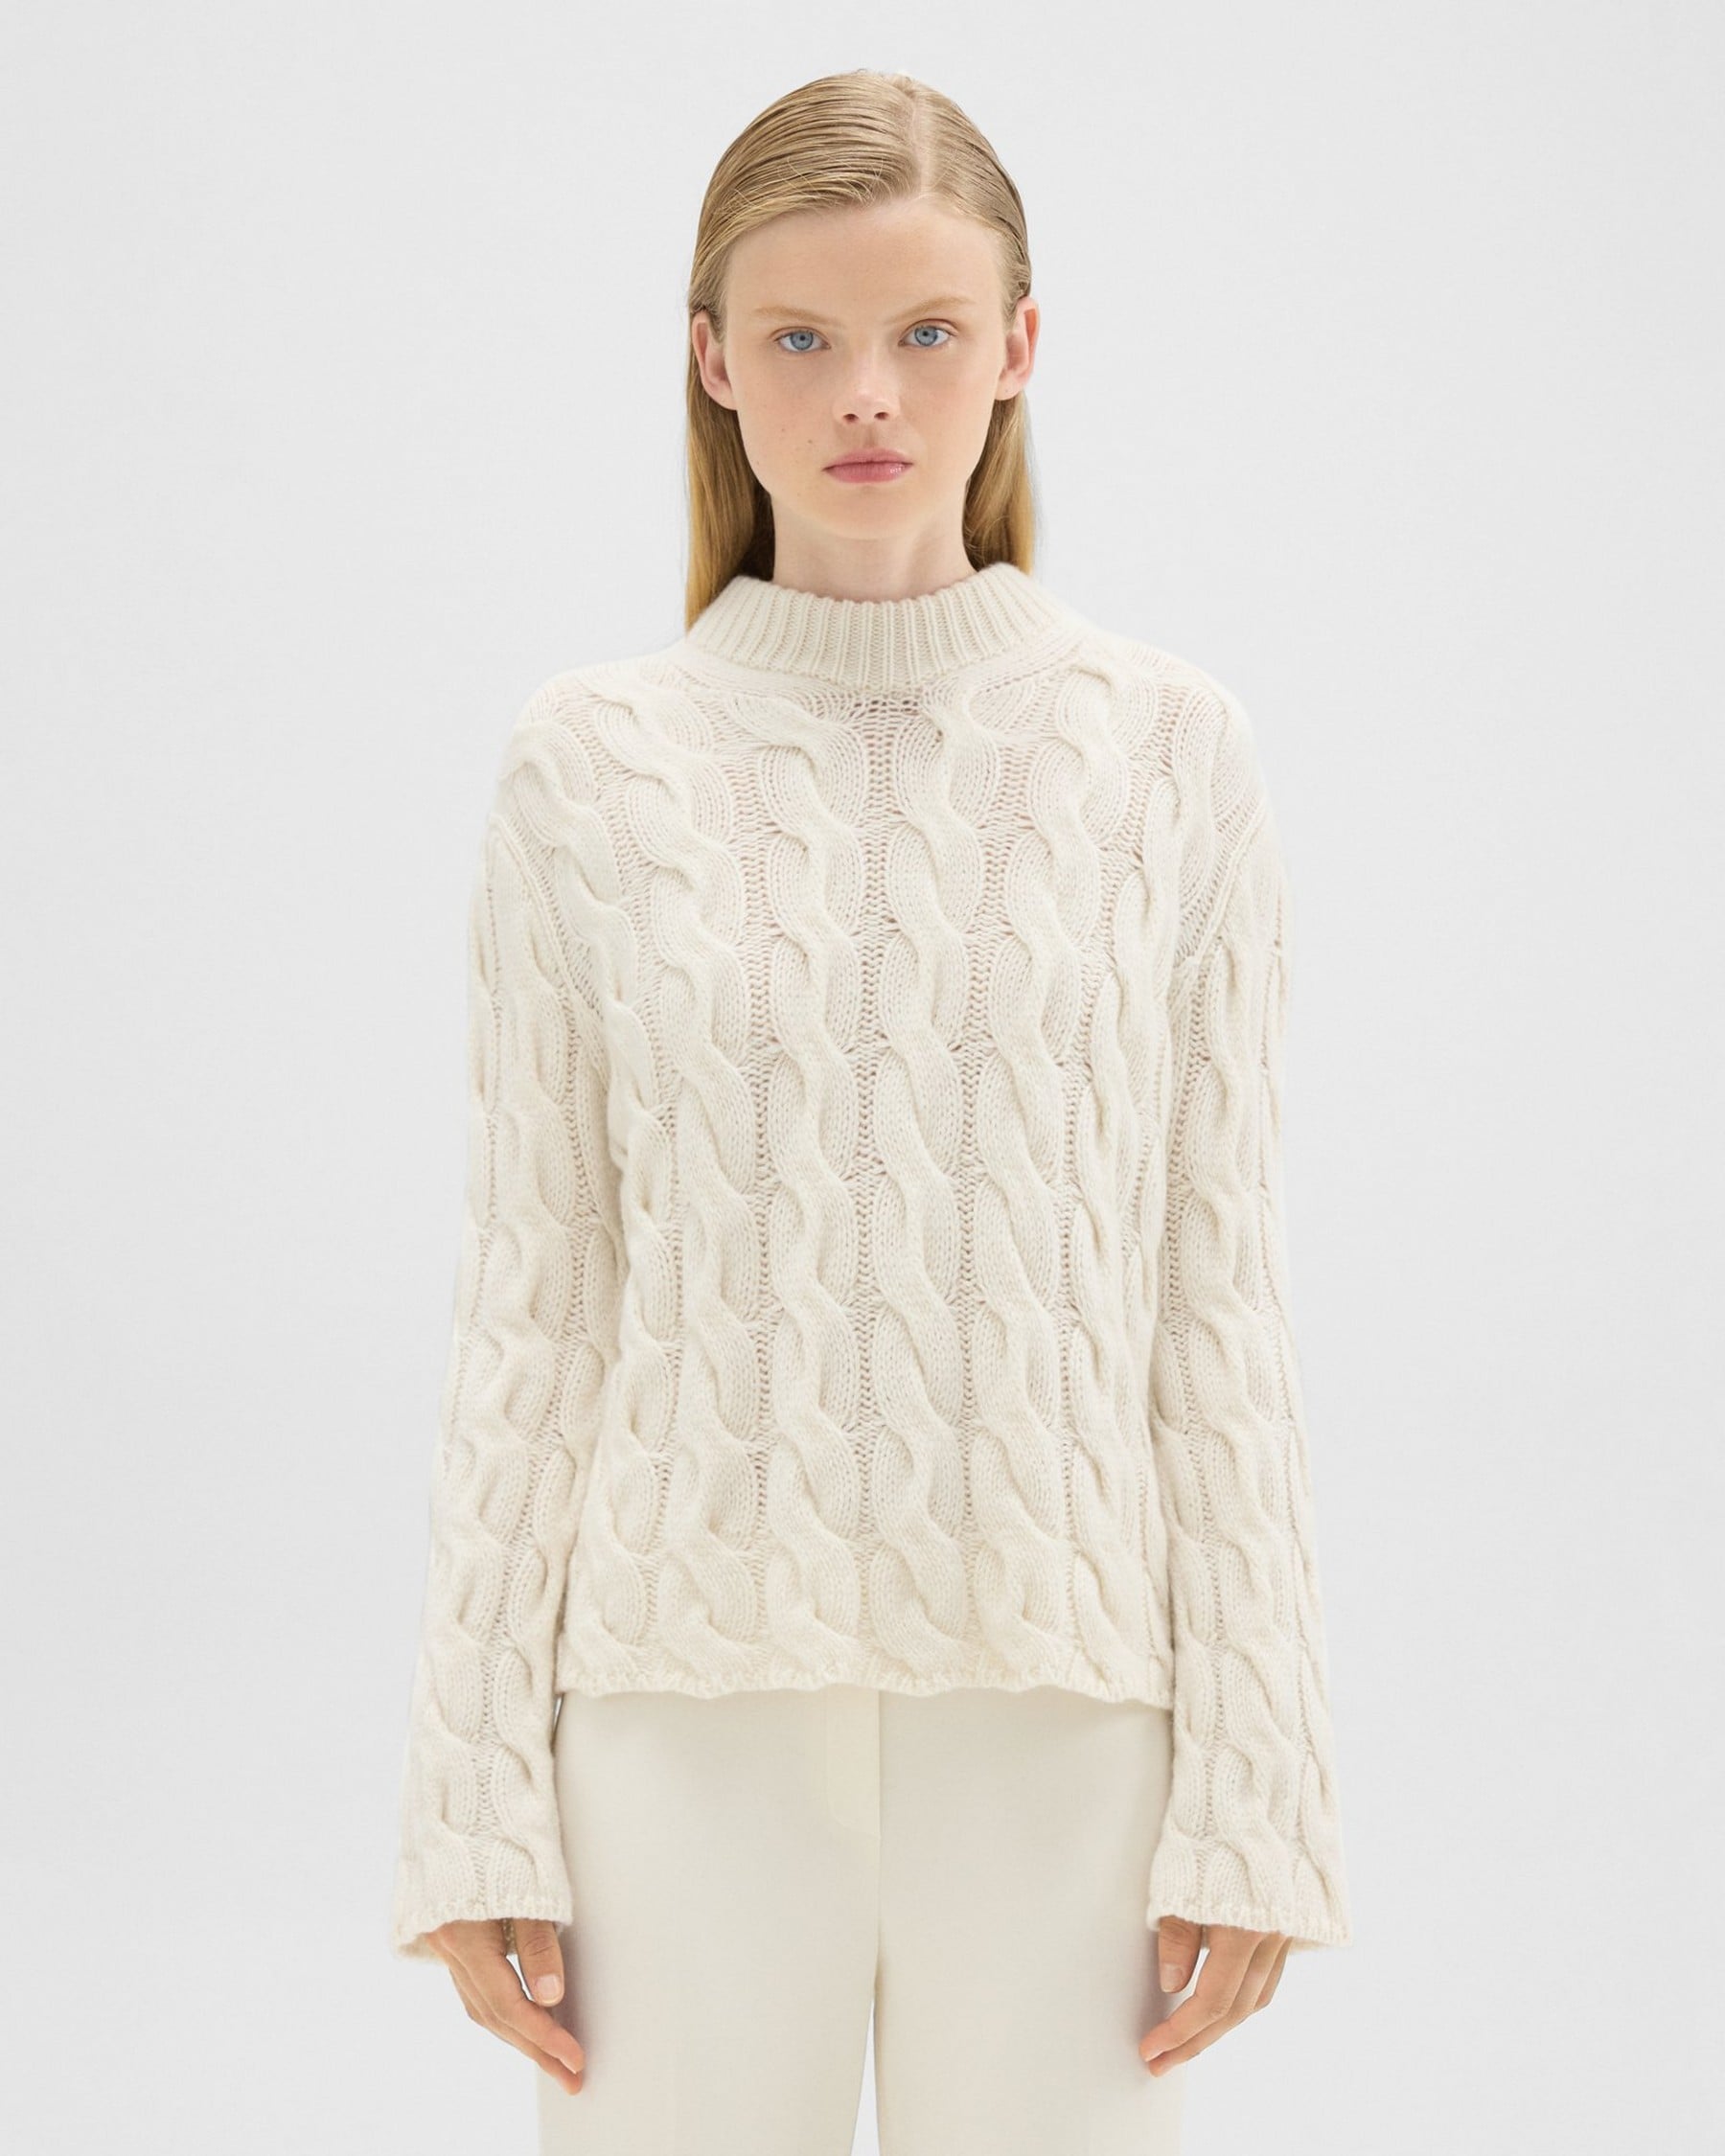 Theory Cable Knit Mock Neck Sweater in Felted Wool-Cashmere